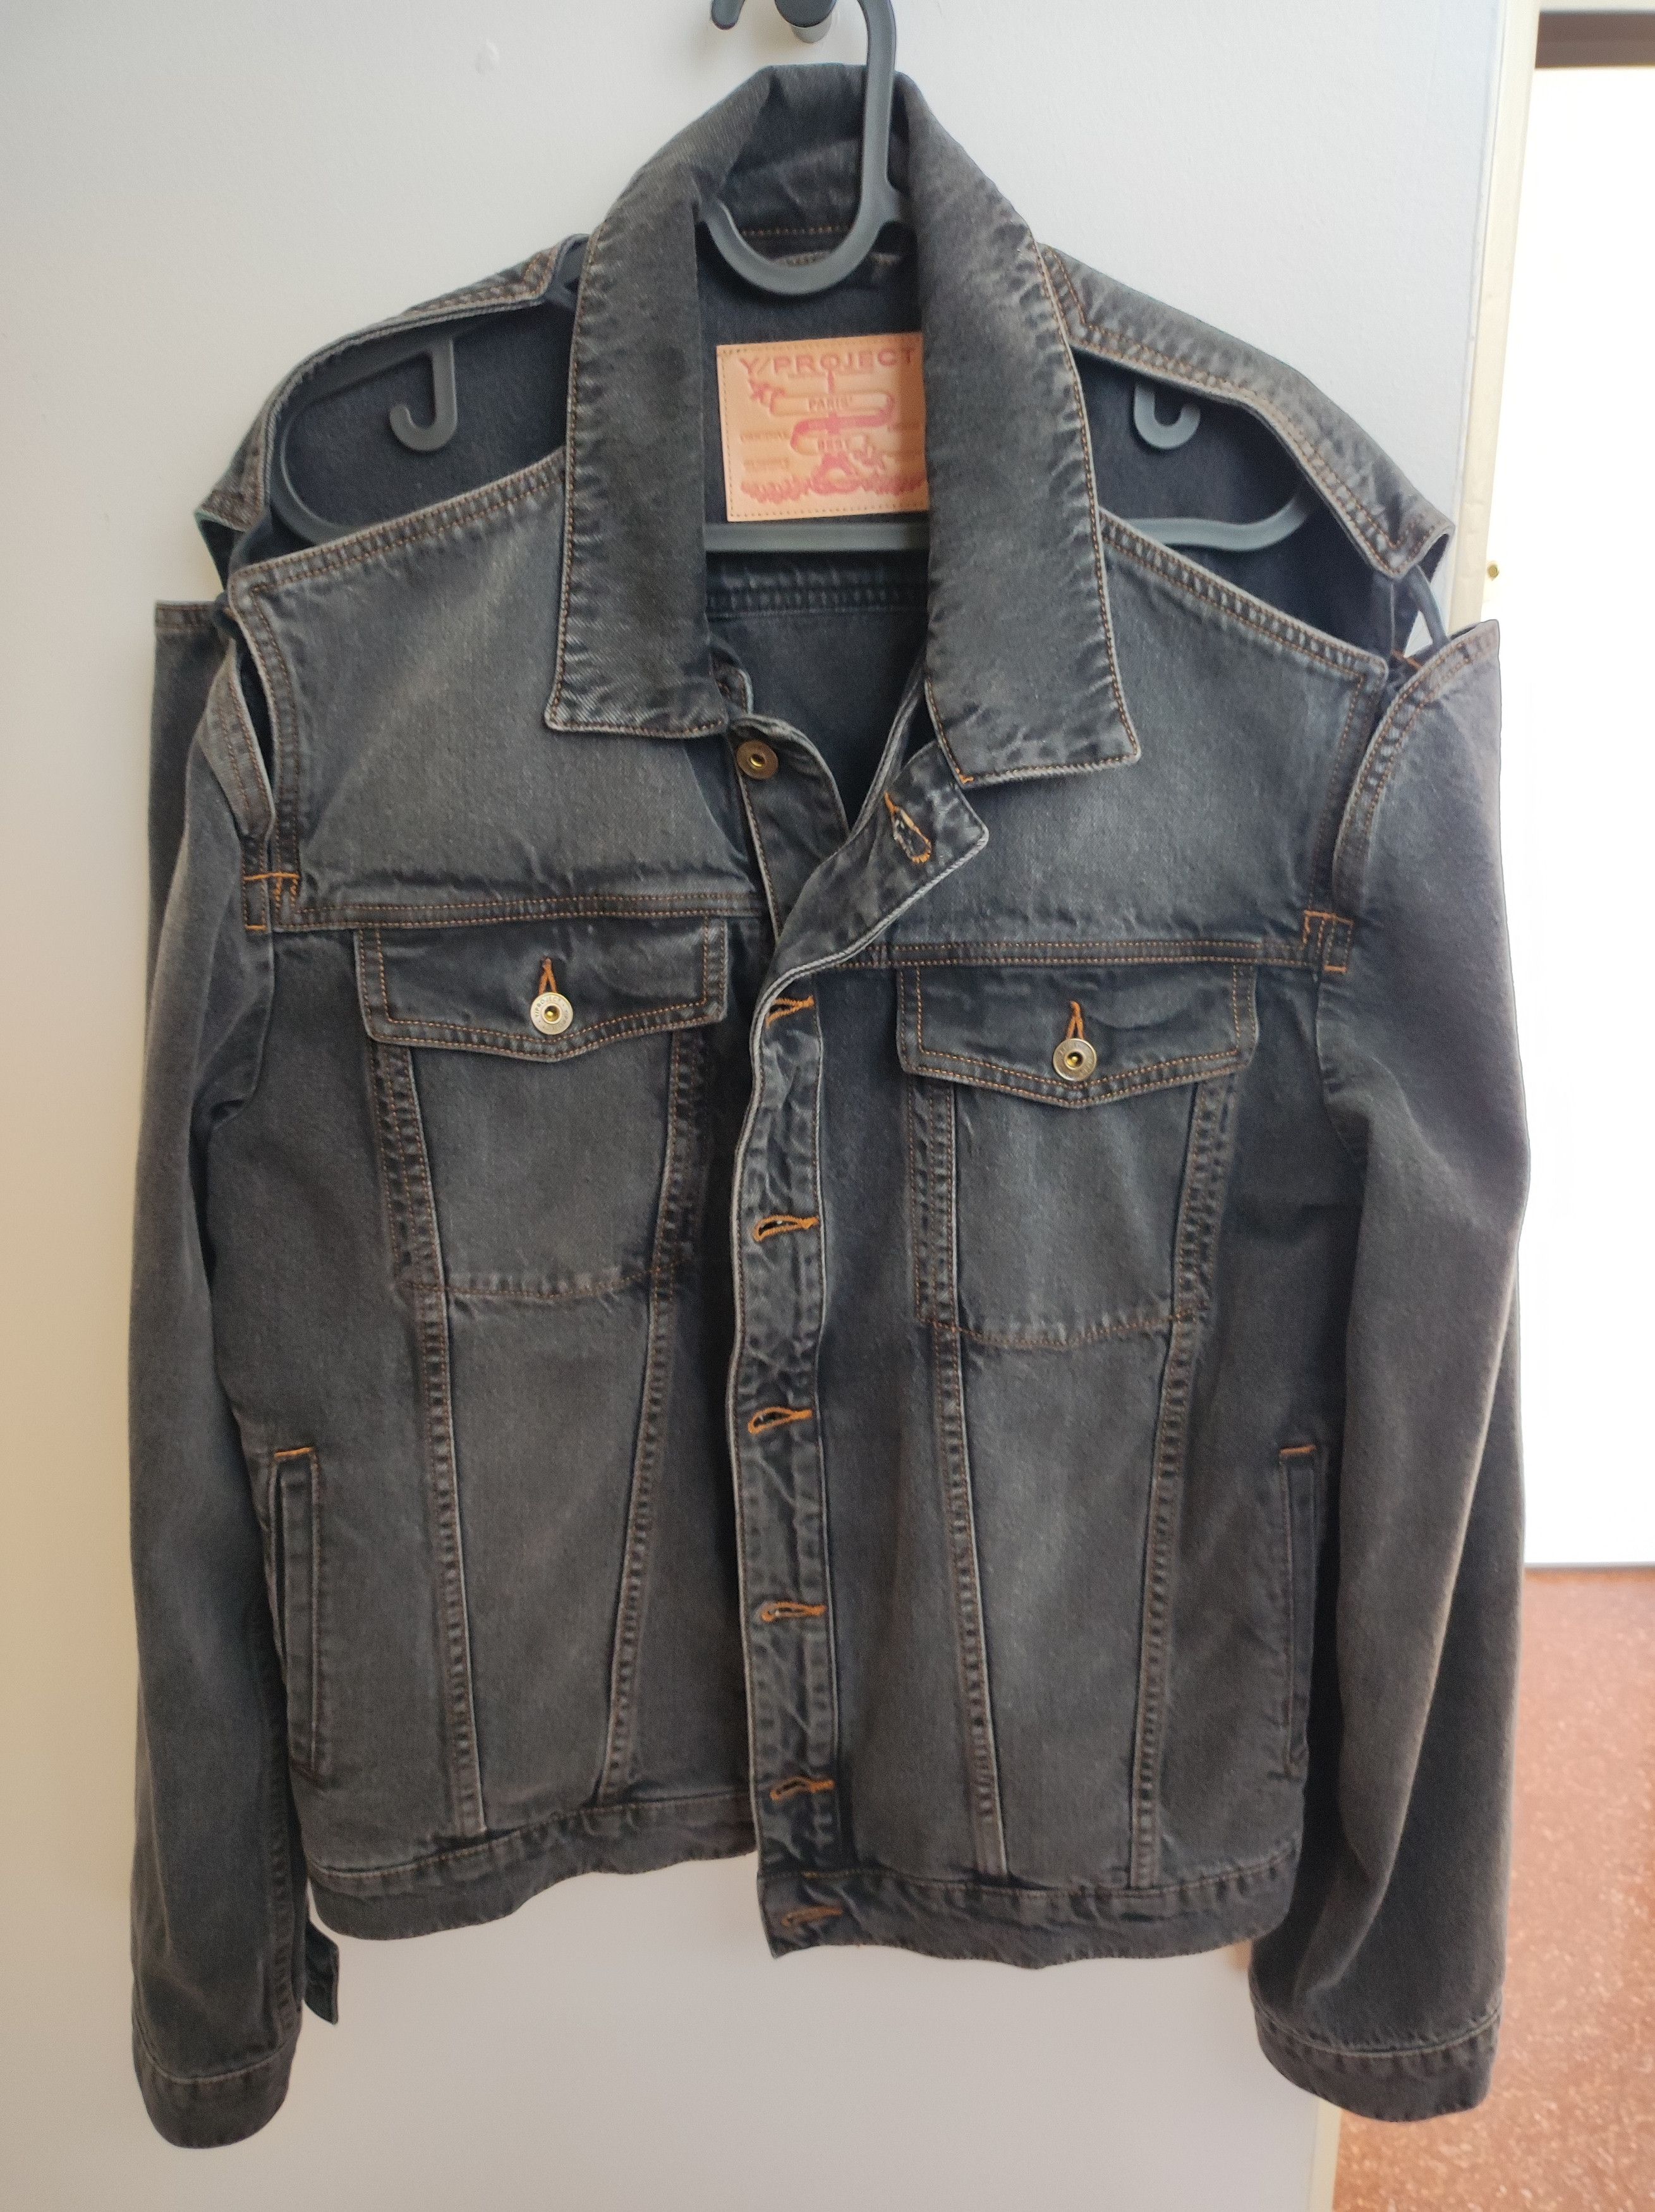 Y/Project Y/Project Denim Classic Peep Show Jacket | Grailed